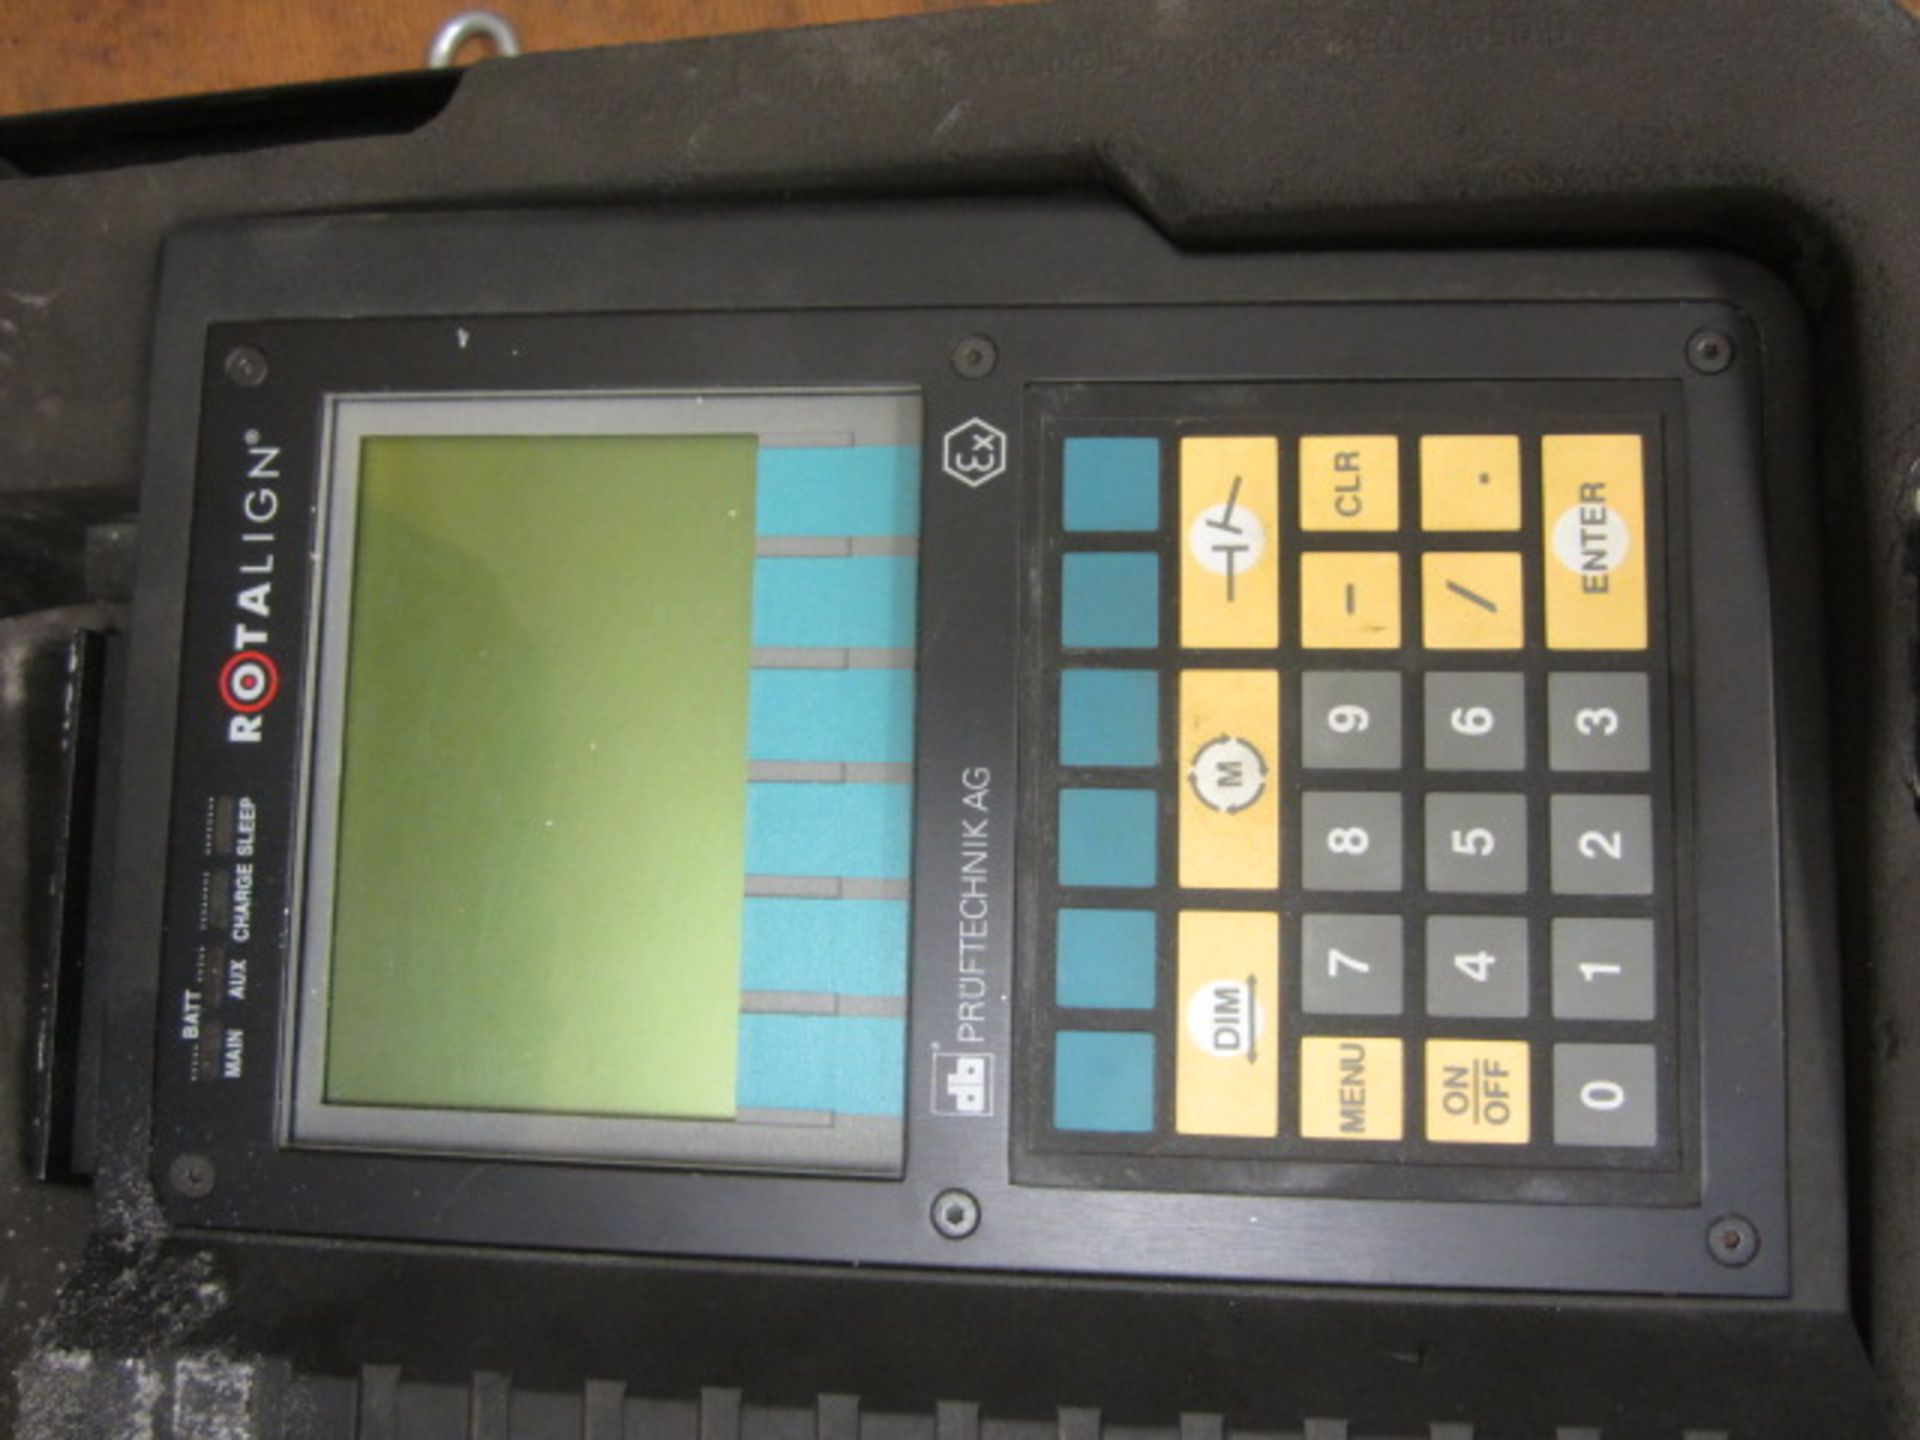 DB Pruftechnik AG Rotalign smart precision alignment, type A1i 3.550 EX, serial no. 00231 - Image 2 of 4